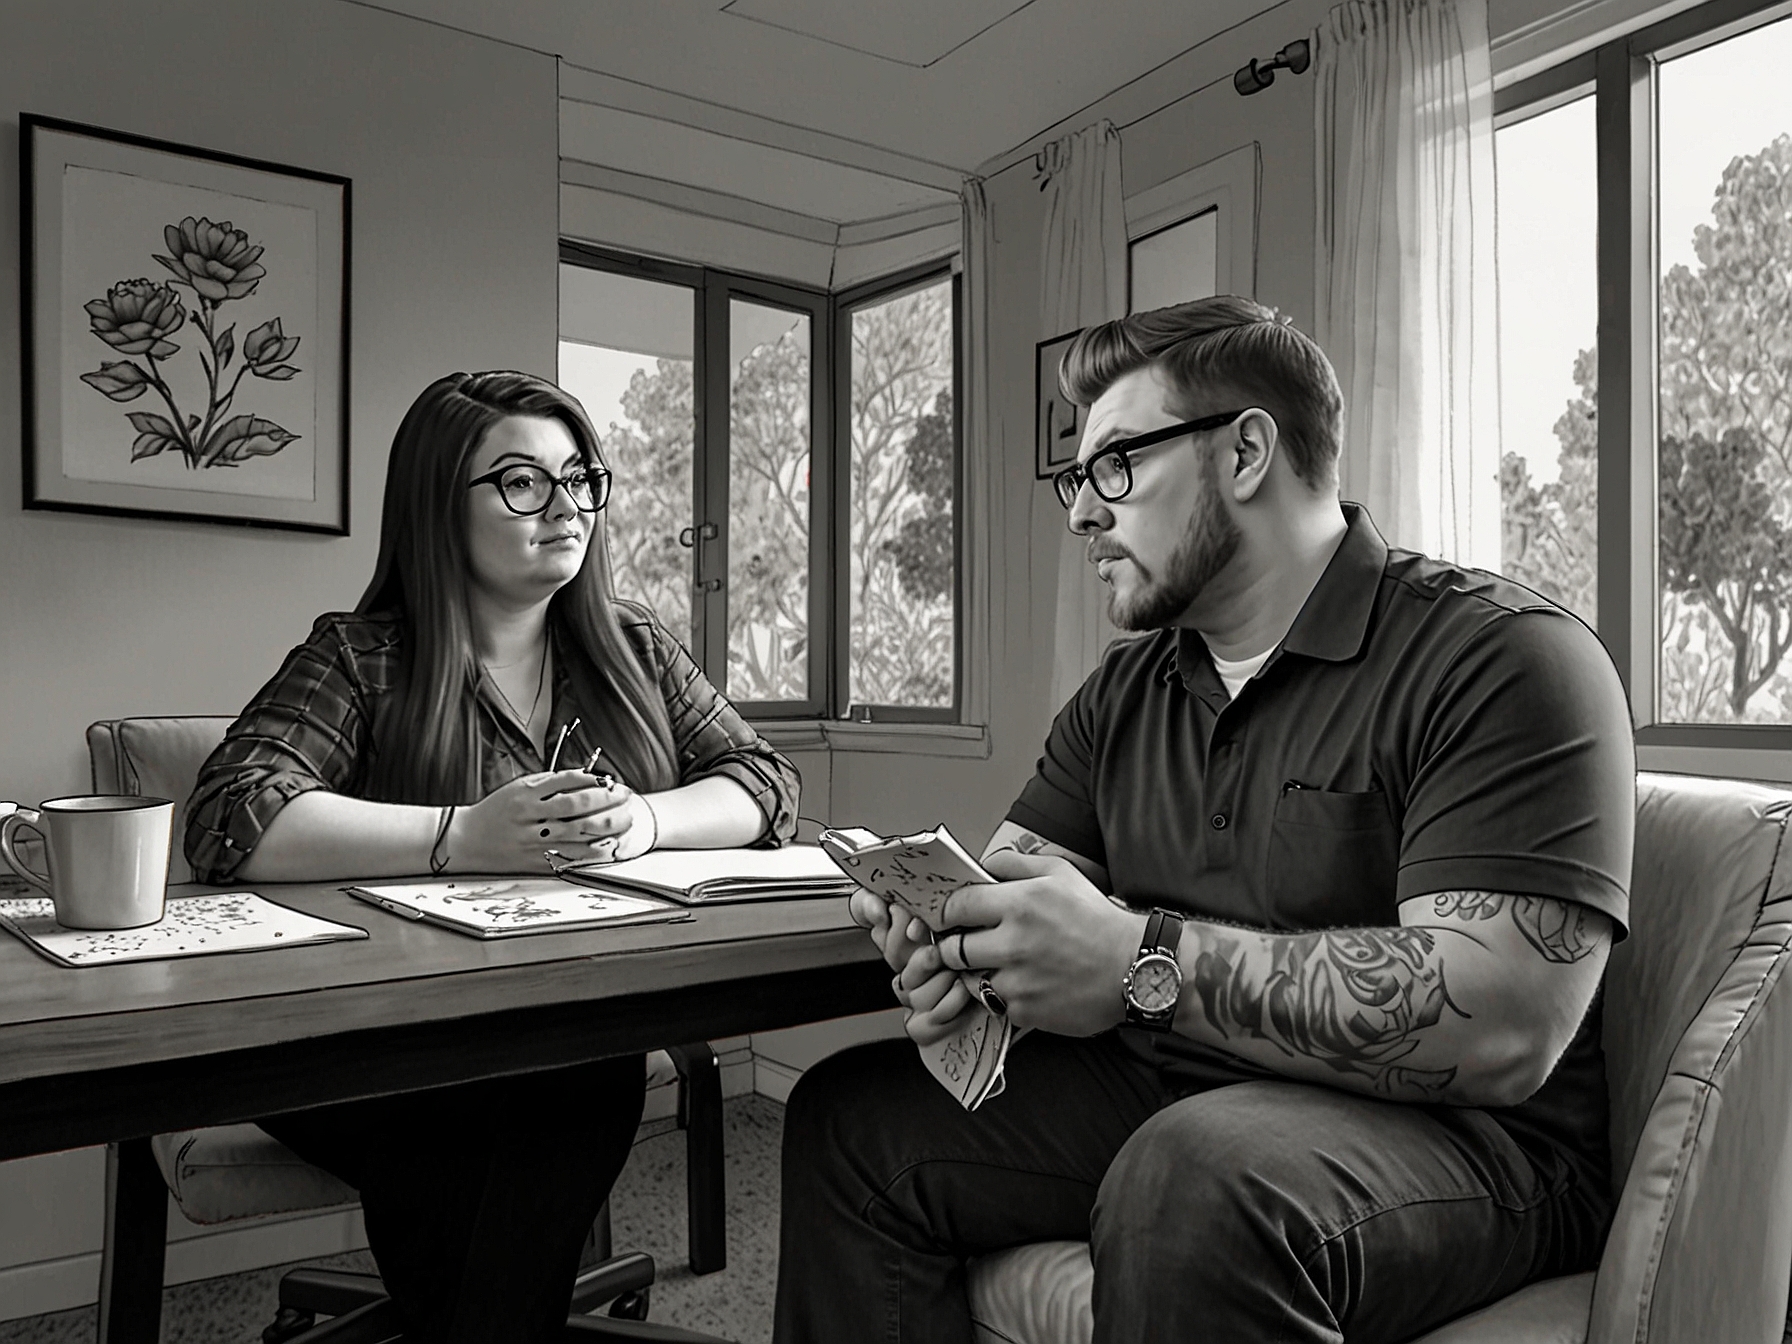 Amber Portwood and Gary Wayt attend a couples therapy session, highlighting their commitment to working through their relationship challenges together.